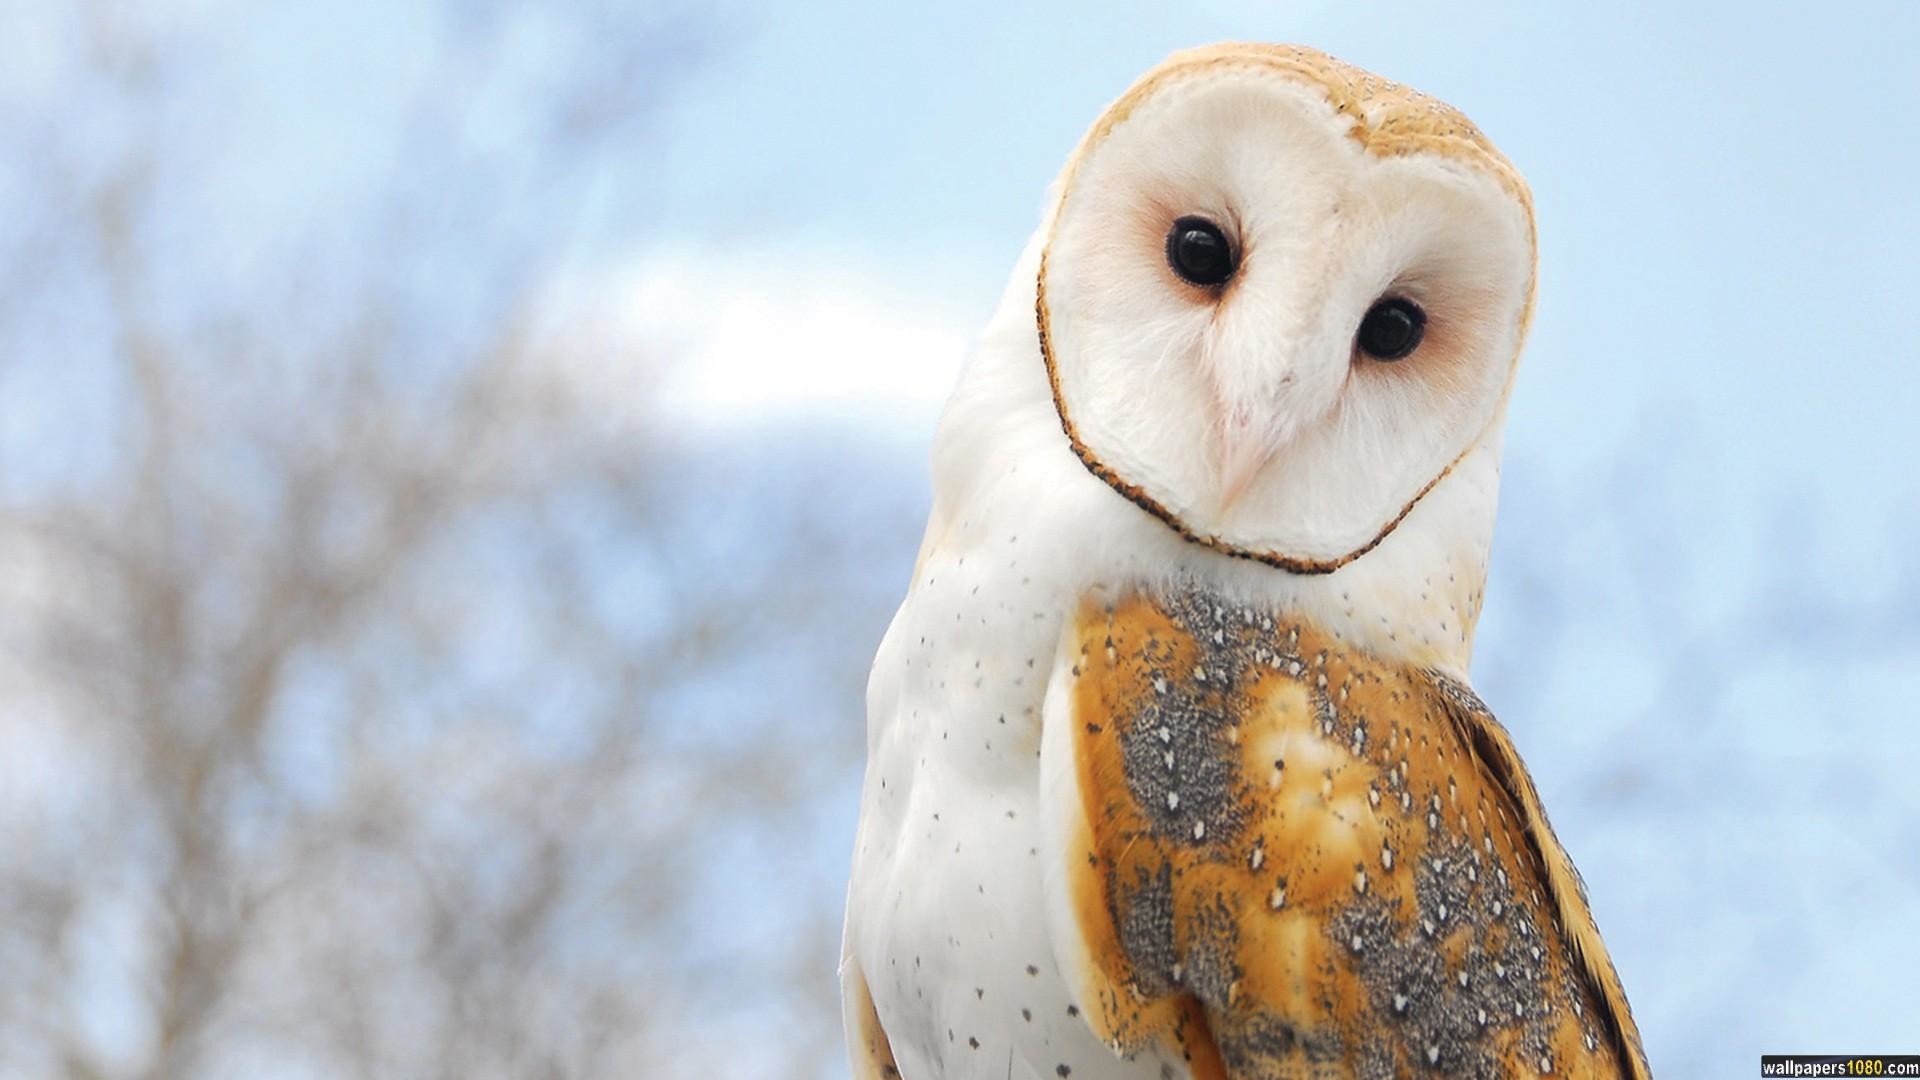 Awesome Owl Wallpapers Hd Images Data-src - Owl Hd Wallpapers 1080p -  1920x1080 Wallpaper 